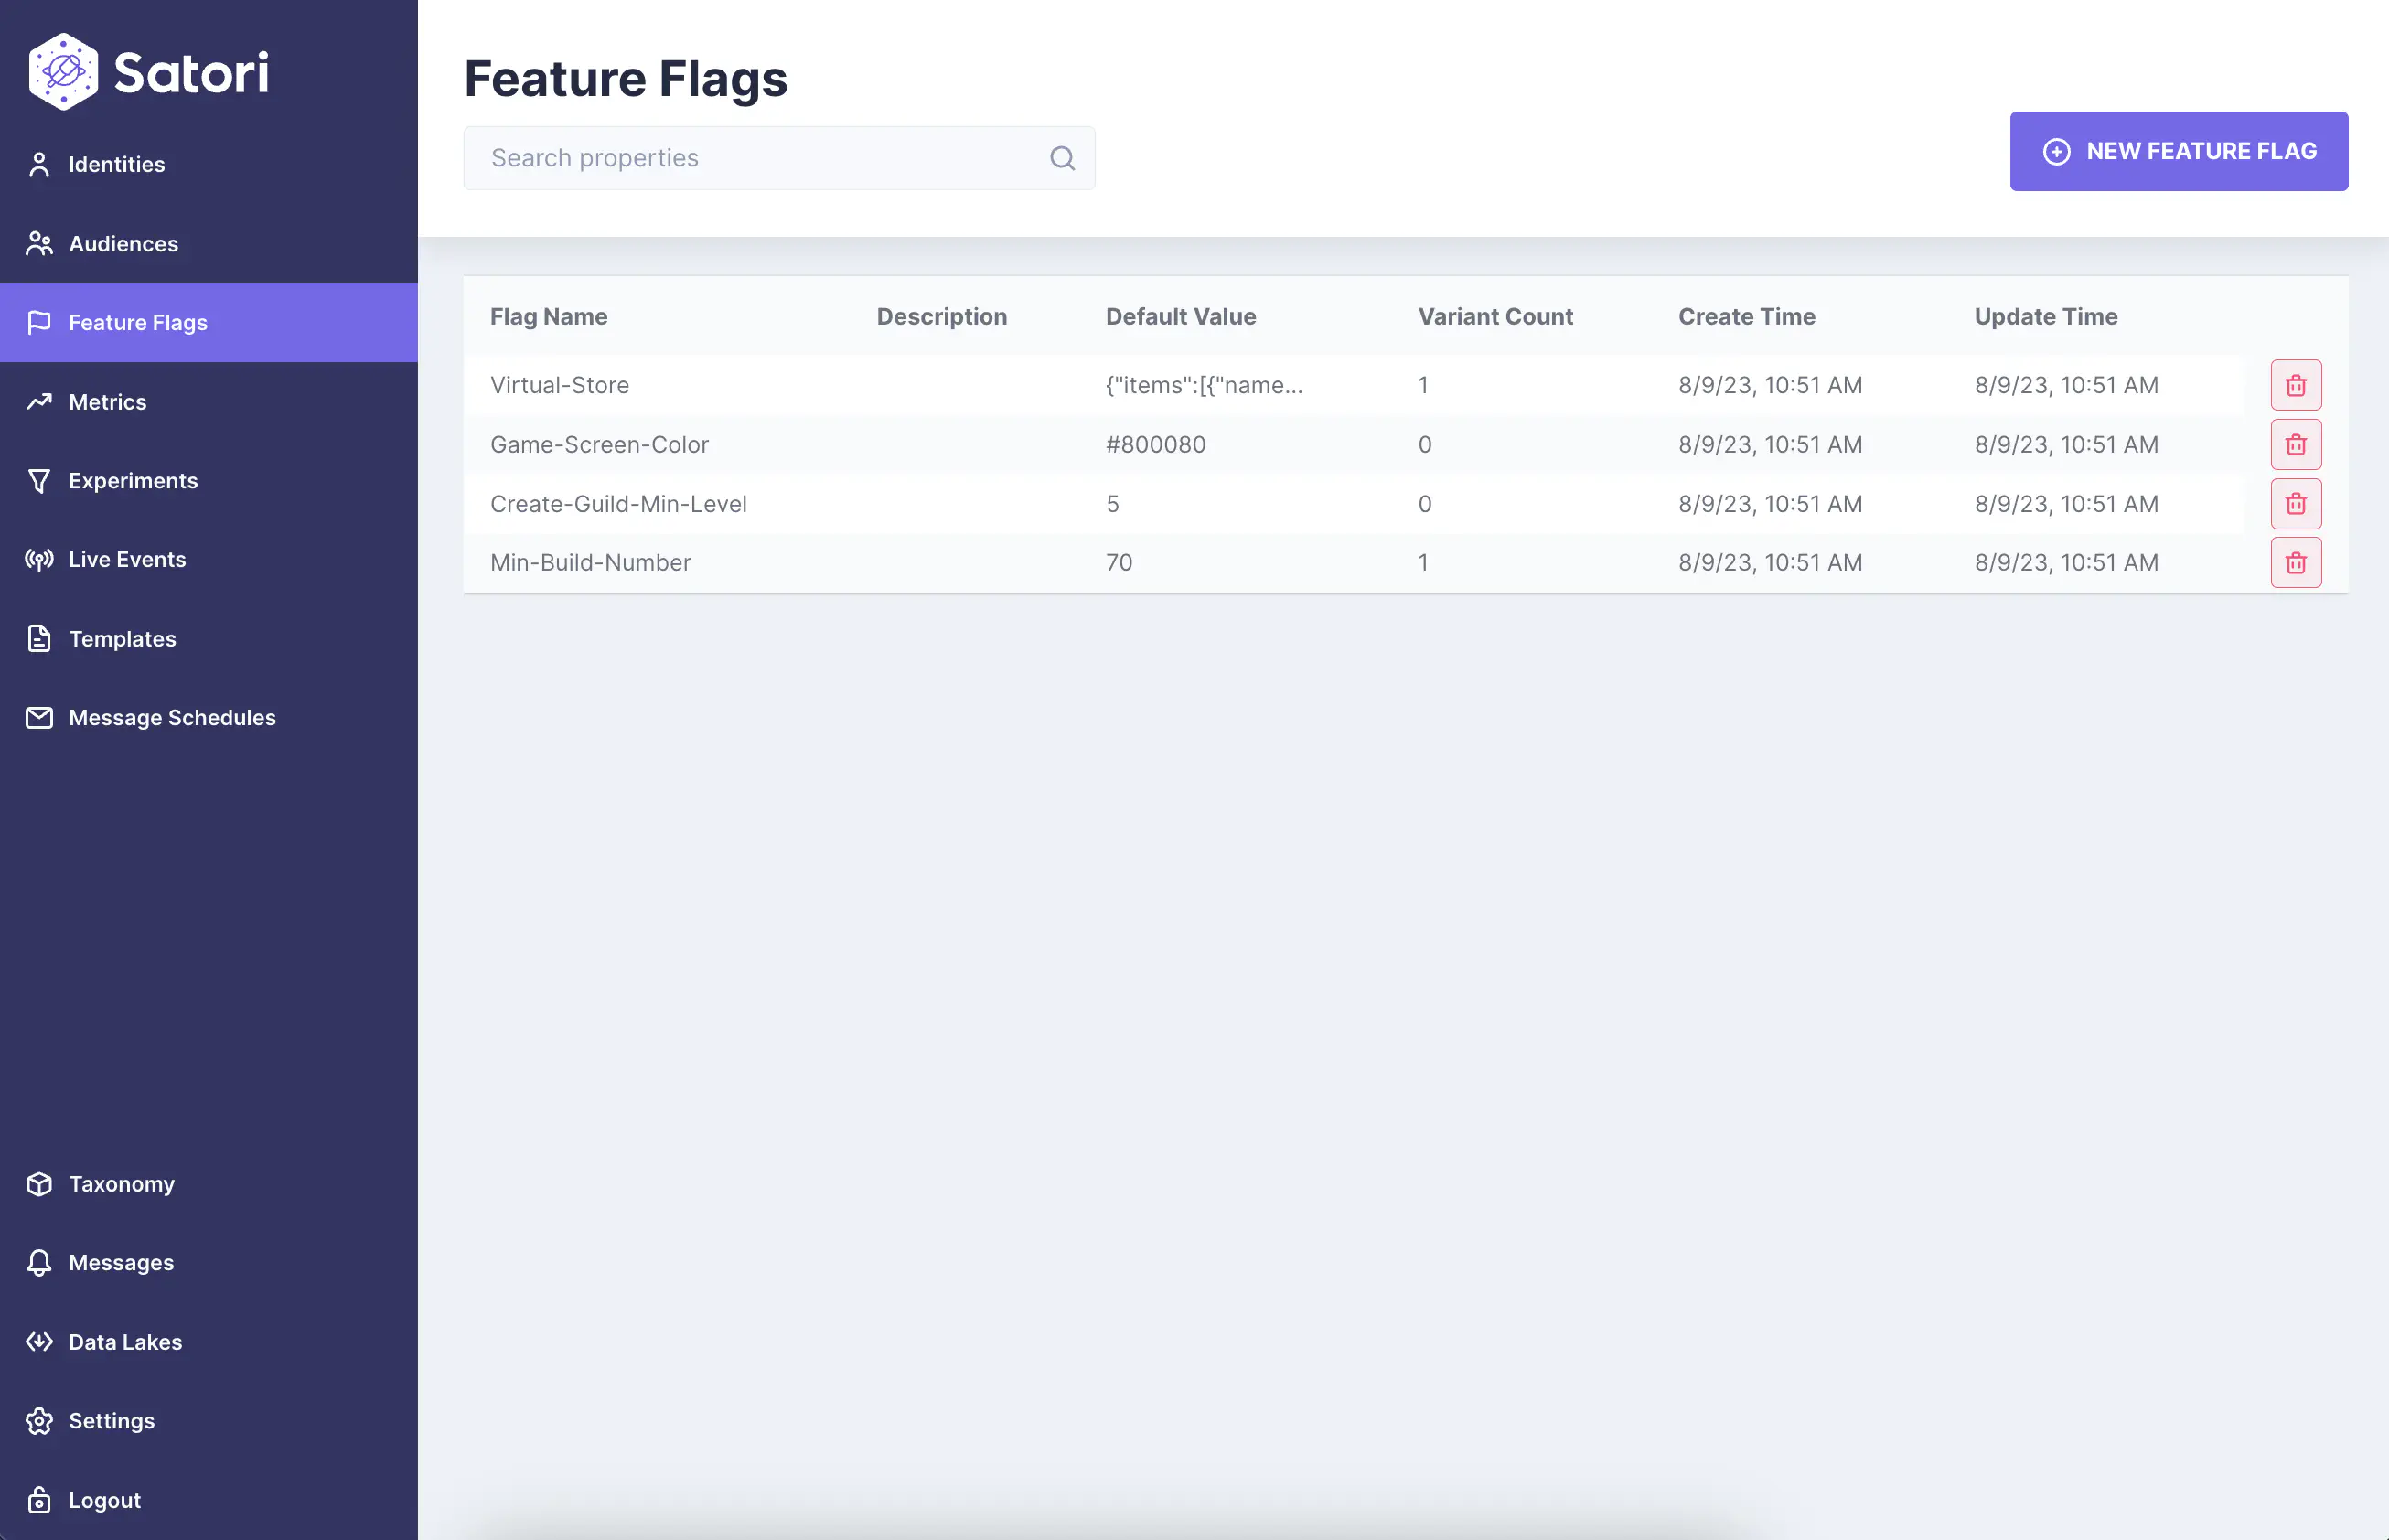 Feature Flags page